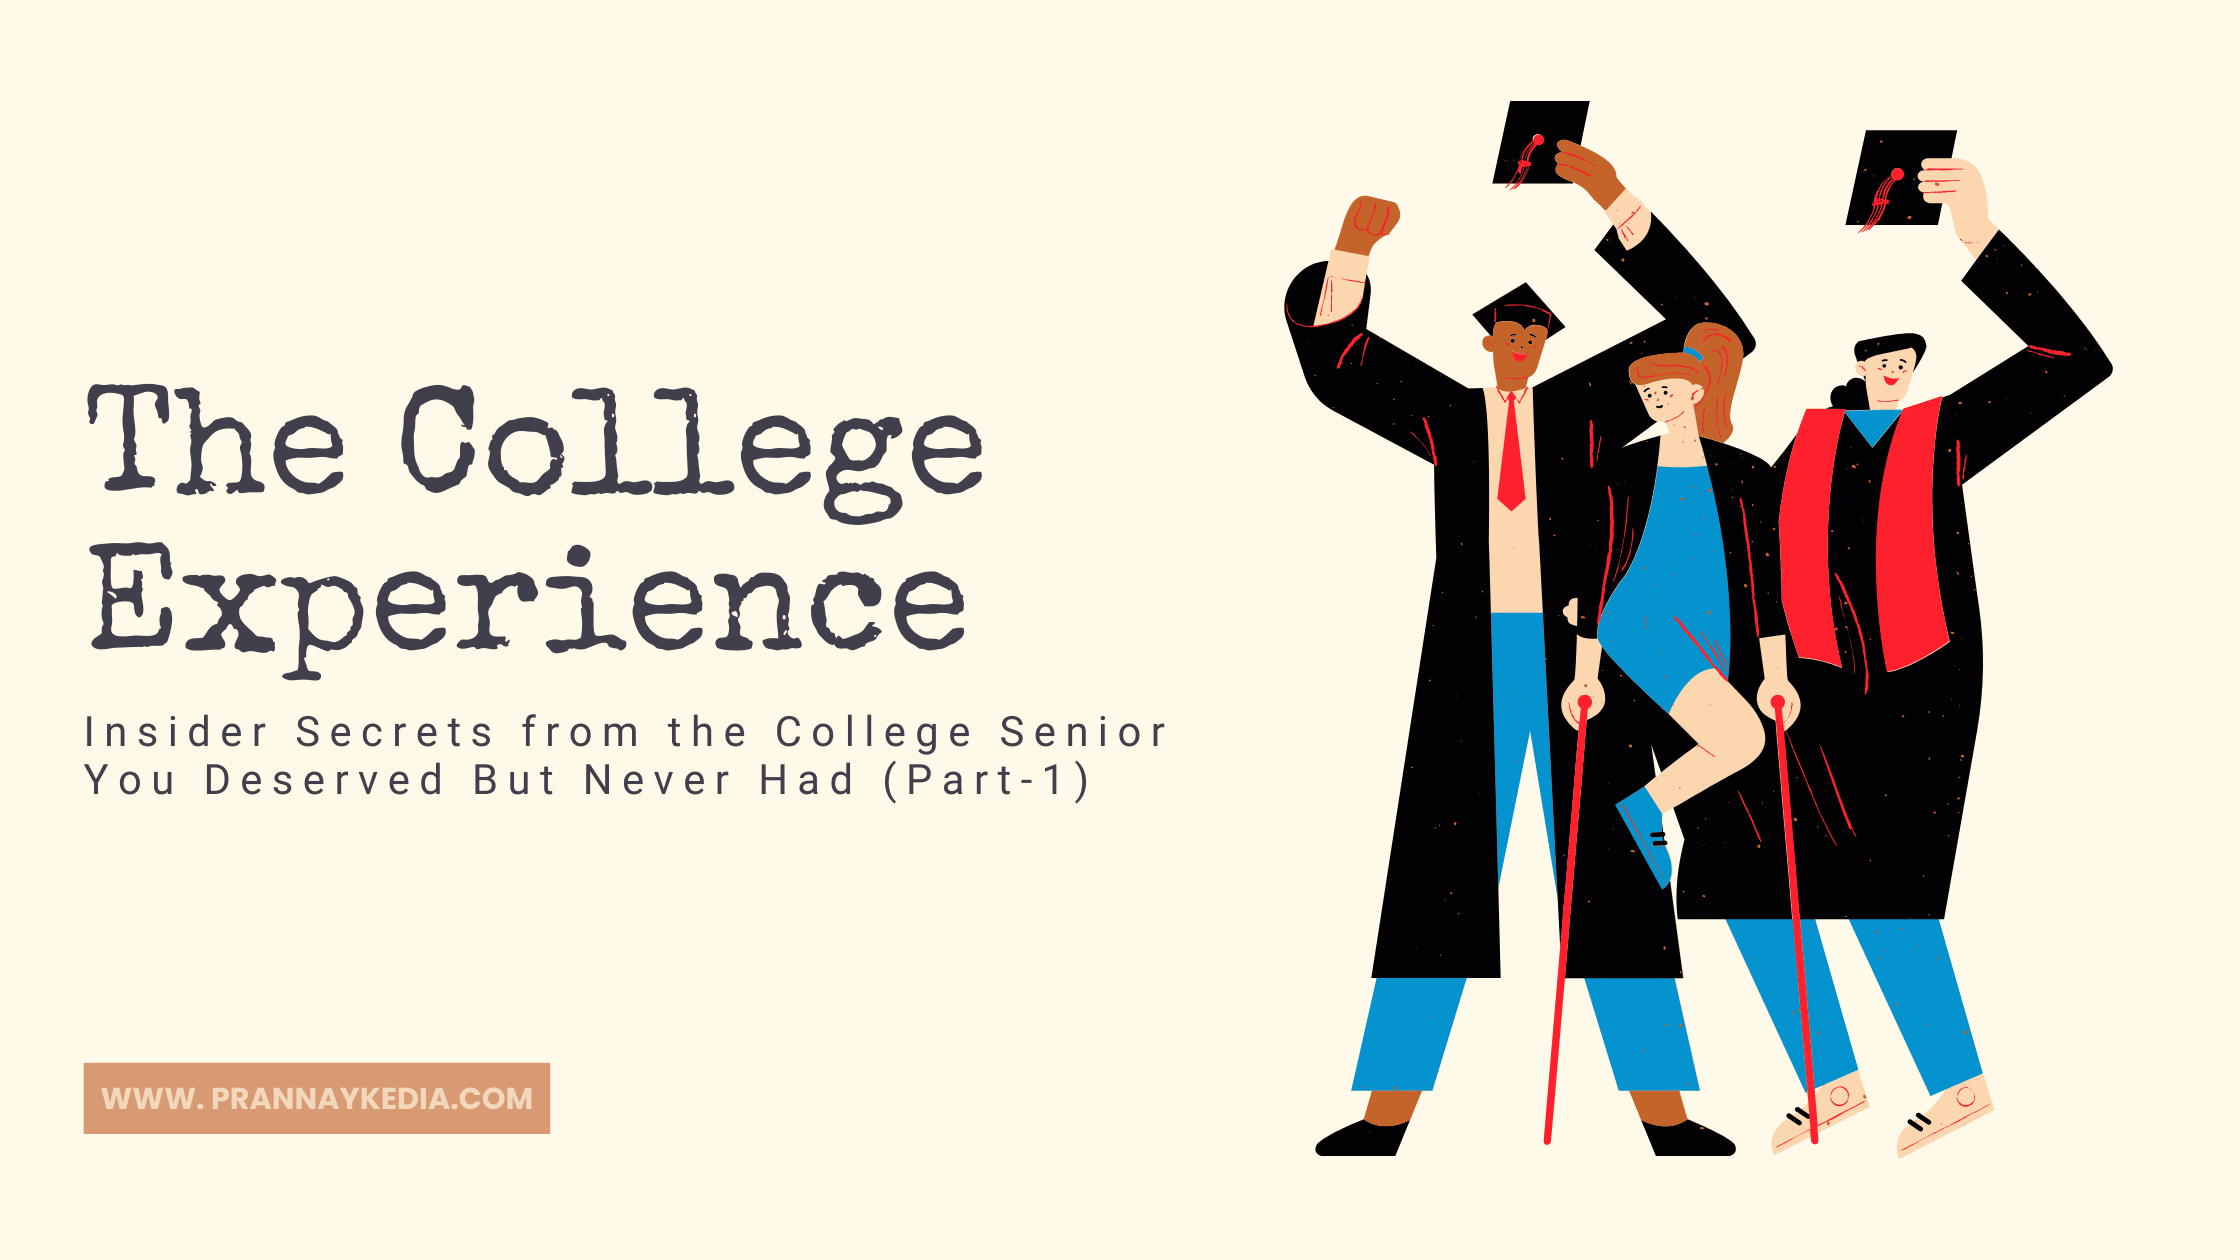 Part 1 of 3-part series. Some anecdotes and experiences to describe the essence of life as a college student.